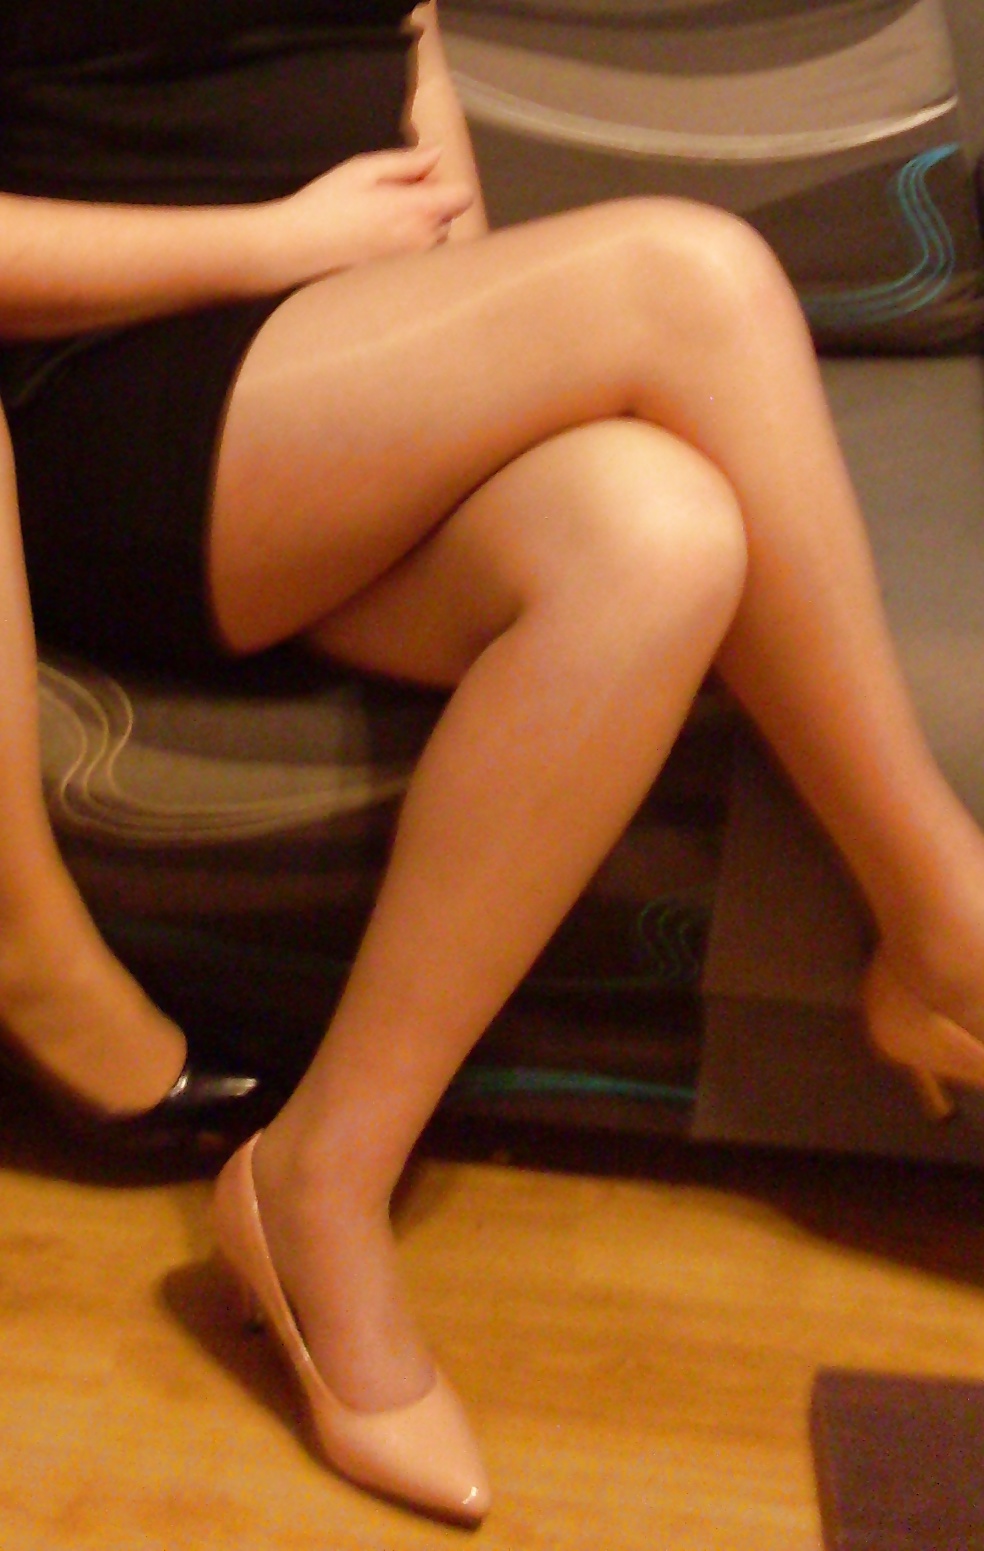 XXX NOT My sister in shiny pantyhose.